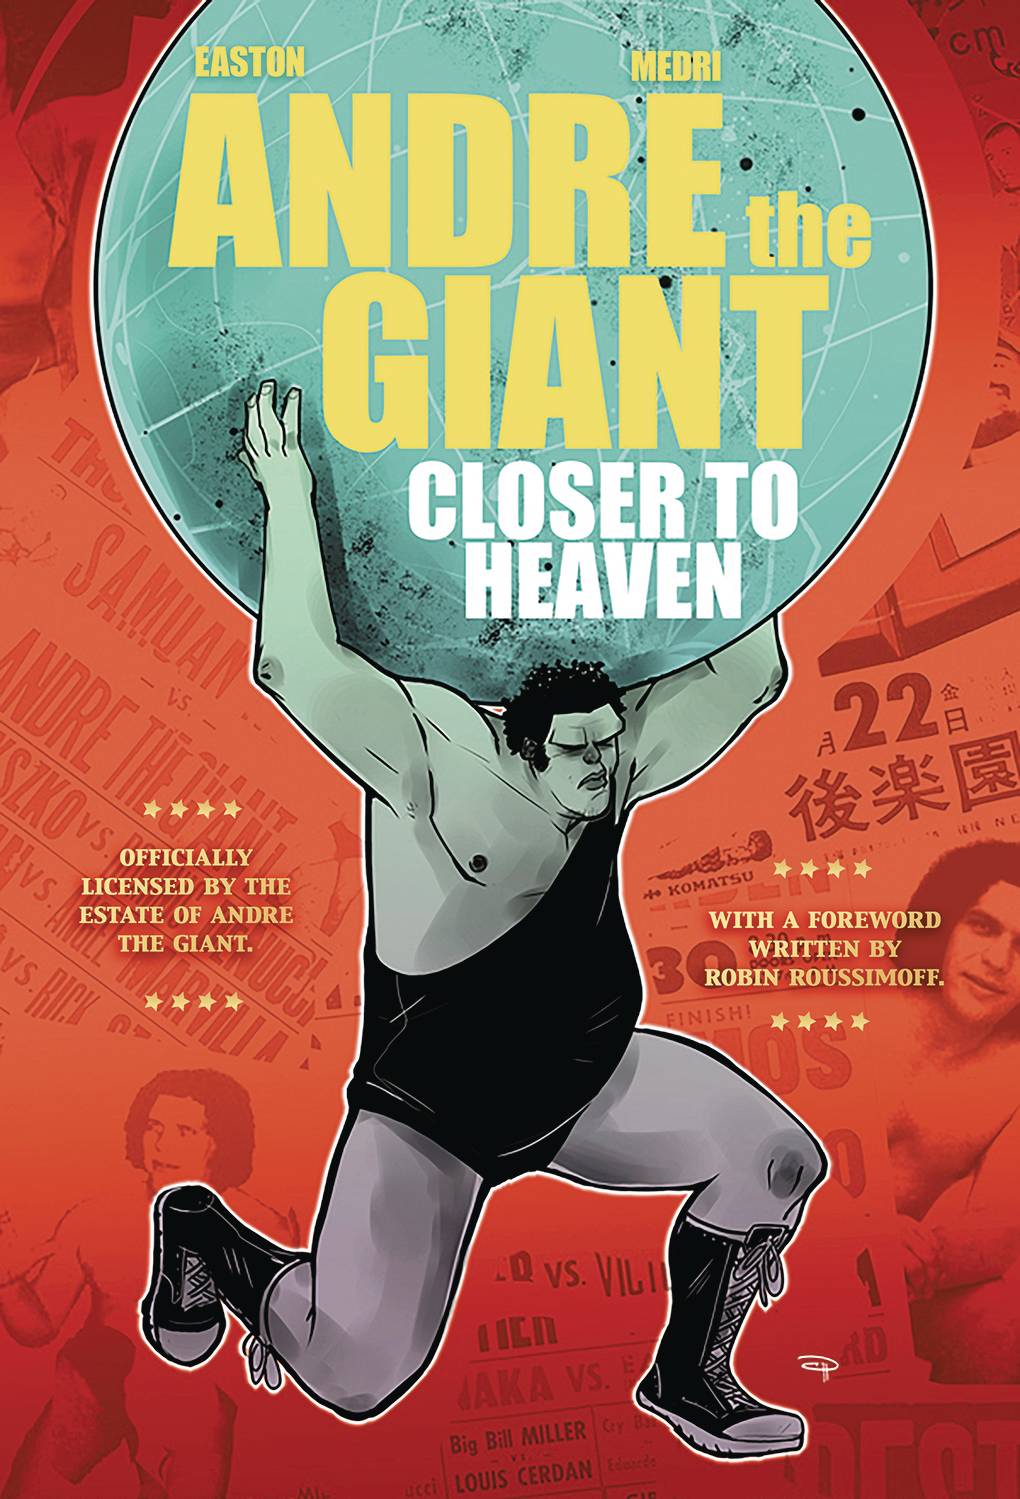 Andre the Giant Graphic Novel Closer To Heaven